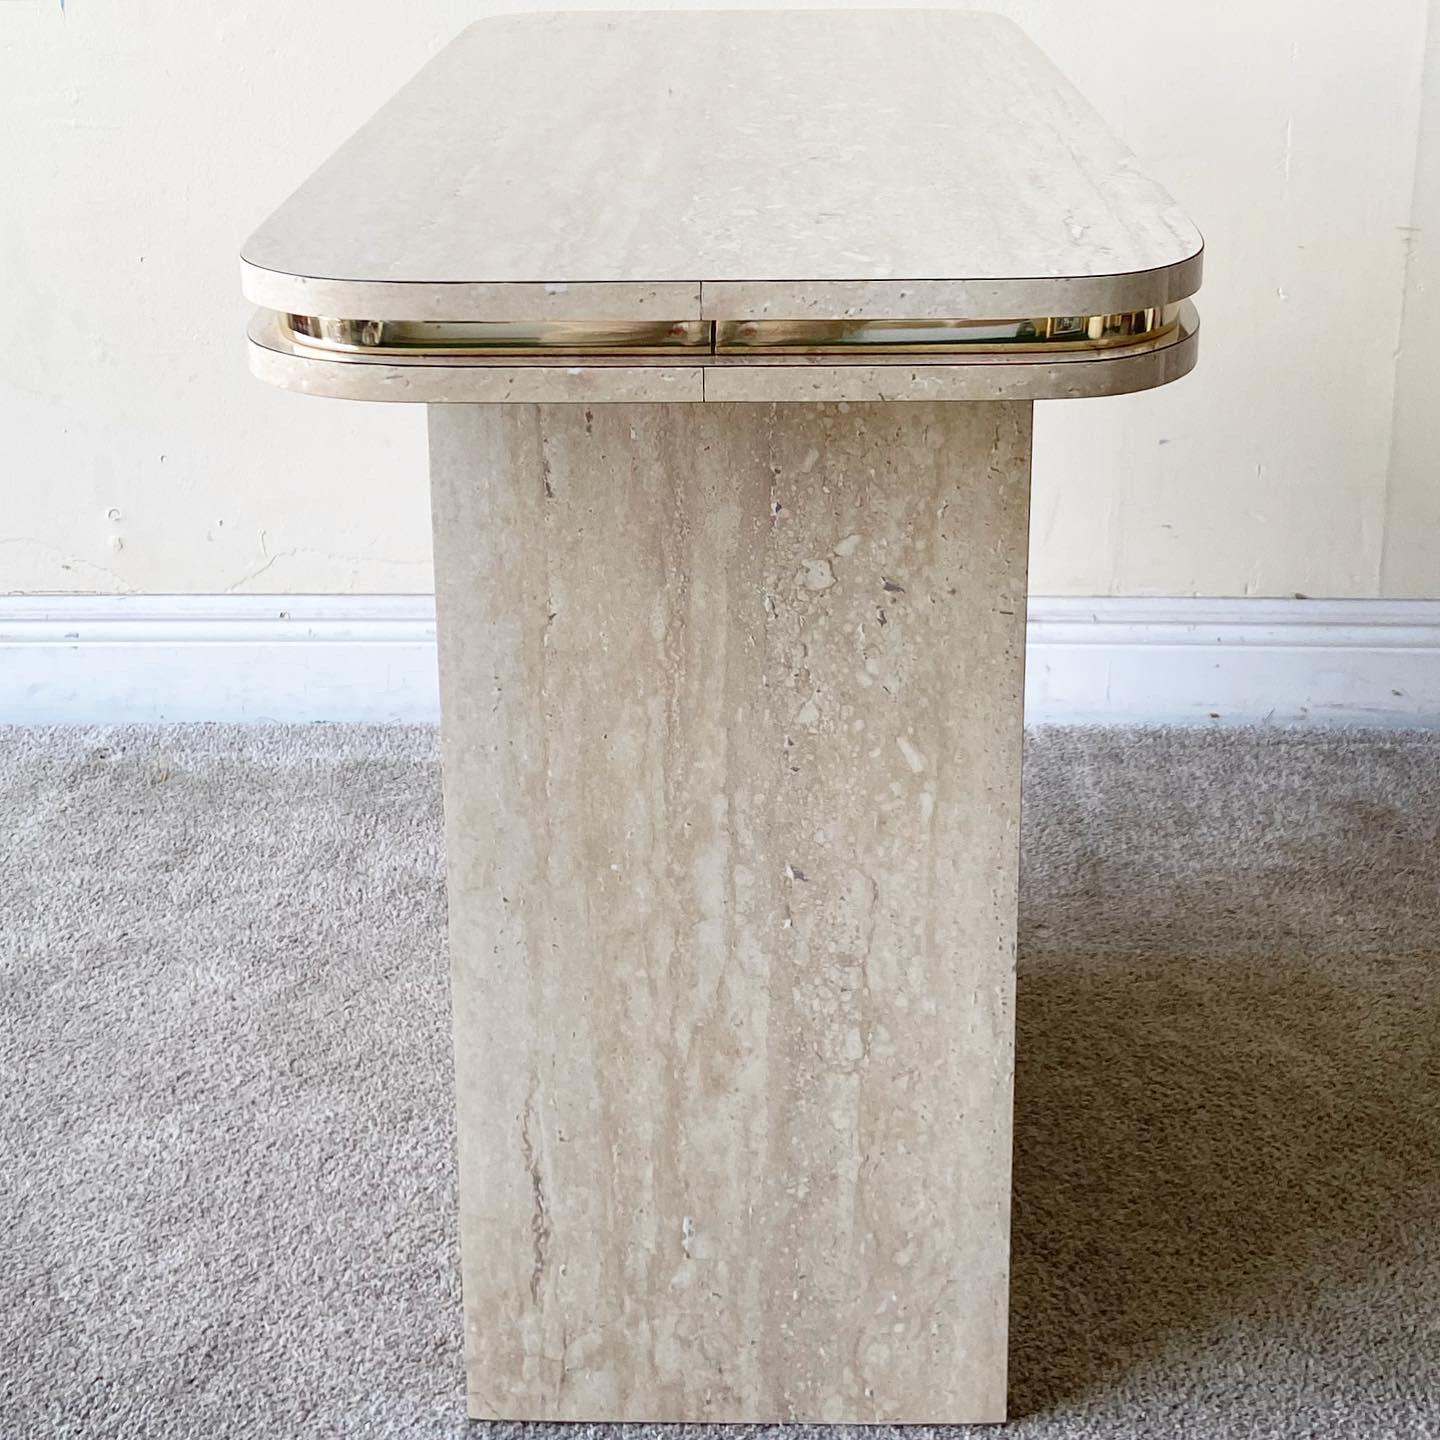 Amazing console table featuring a rectangular faux travertine laminate top with a faux travertine laminate base.

Additional information:
Material: Wood
Color: Beige, Brown, gold, tan
Style: Postmodern
Time Period: 1980s
Place of origin: